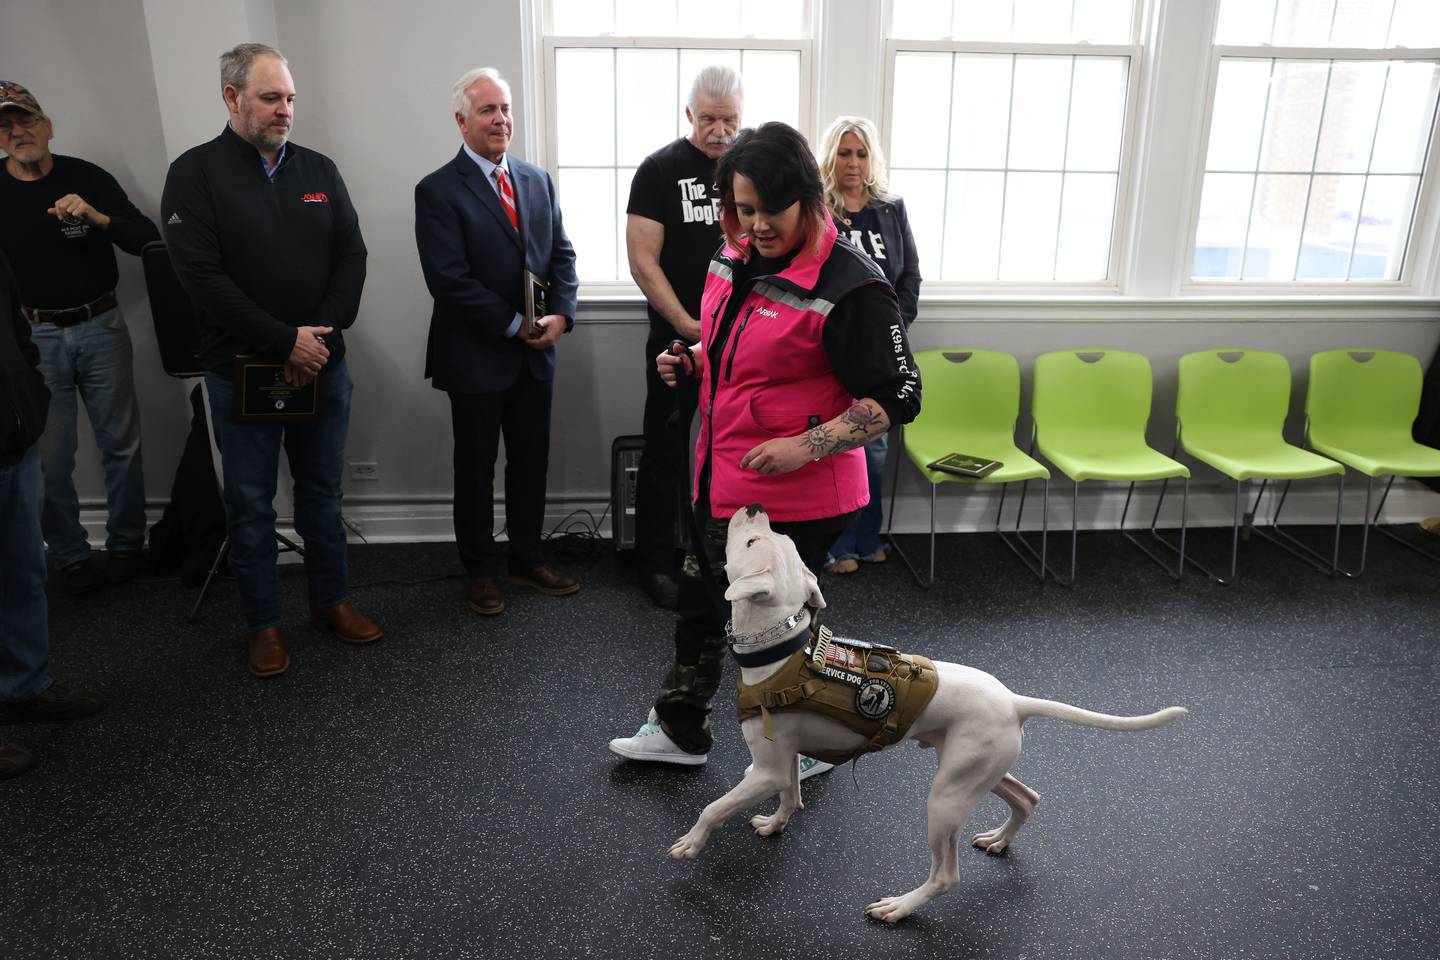 Dog trainer Kate McGrail does a demonstration with service dog Omega, an American Bulldog at the K9s for Veterans ribbon-cutting ceremony for the opening of its new training campus on Wednesday, Feb. 15, 2023, in Joliet.